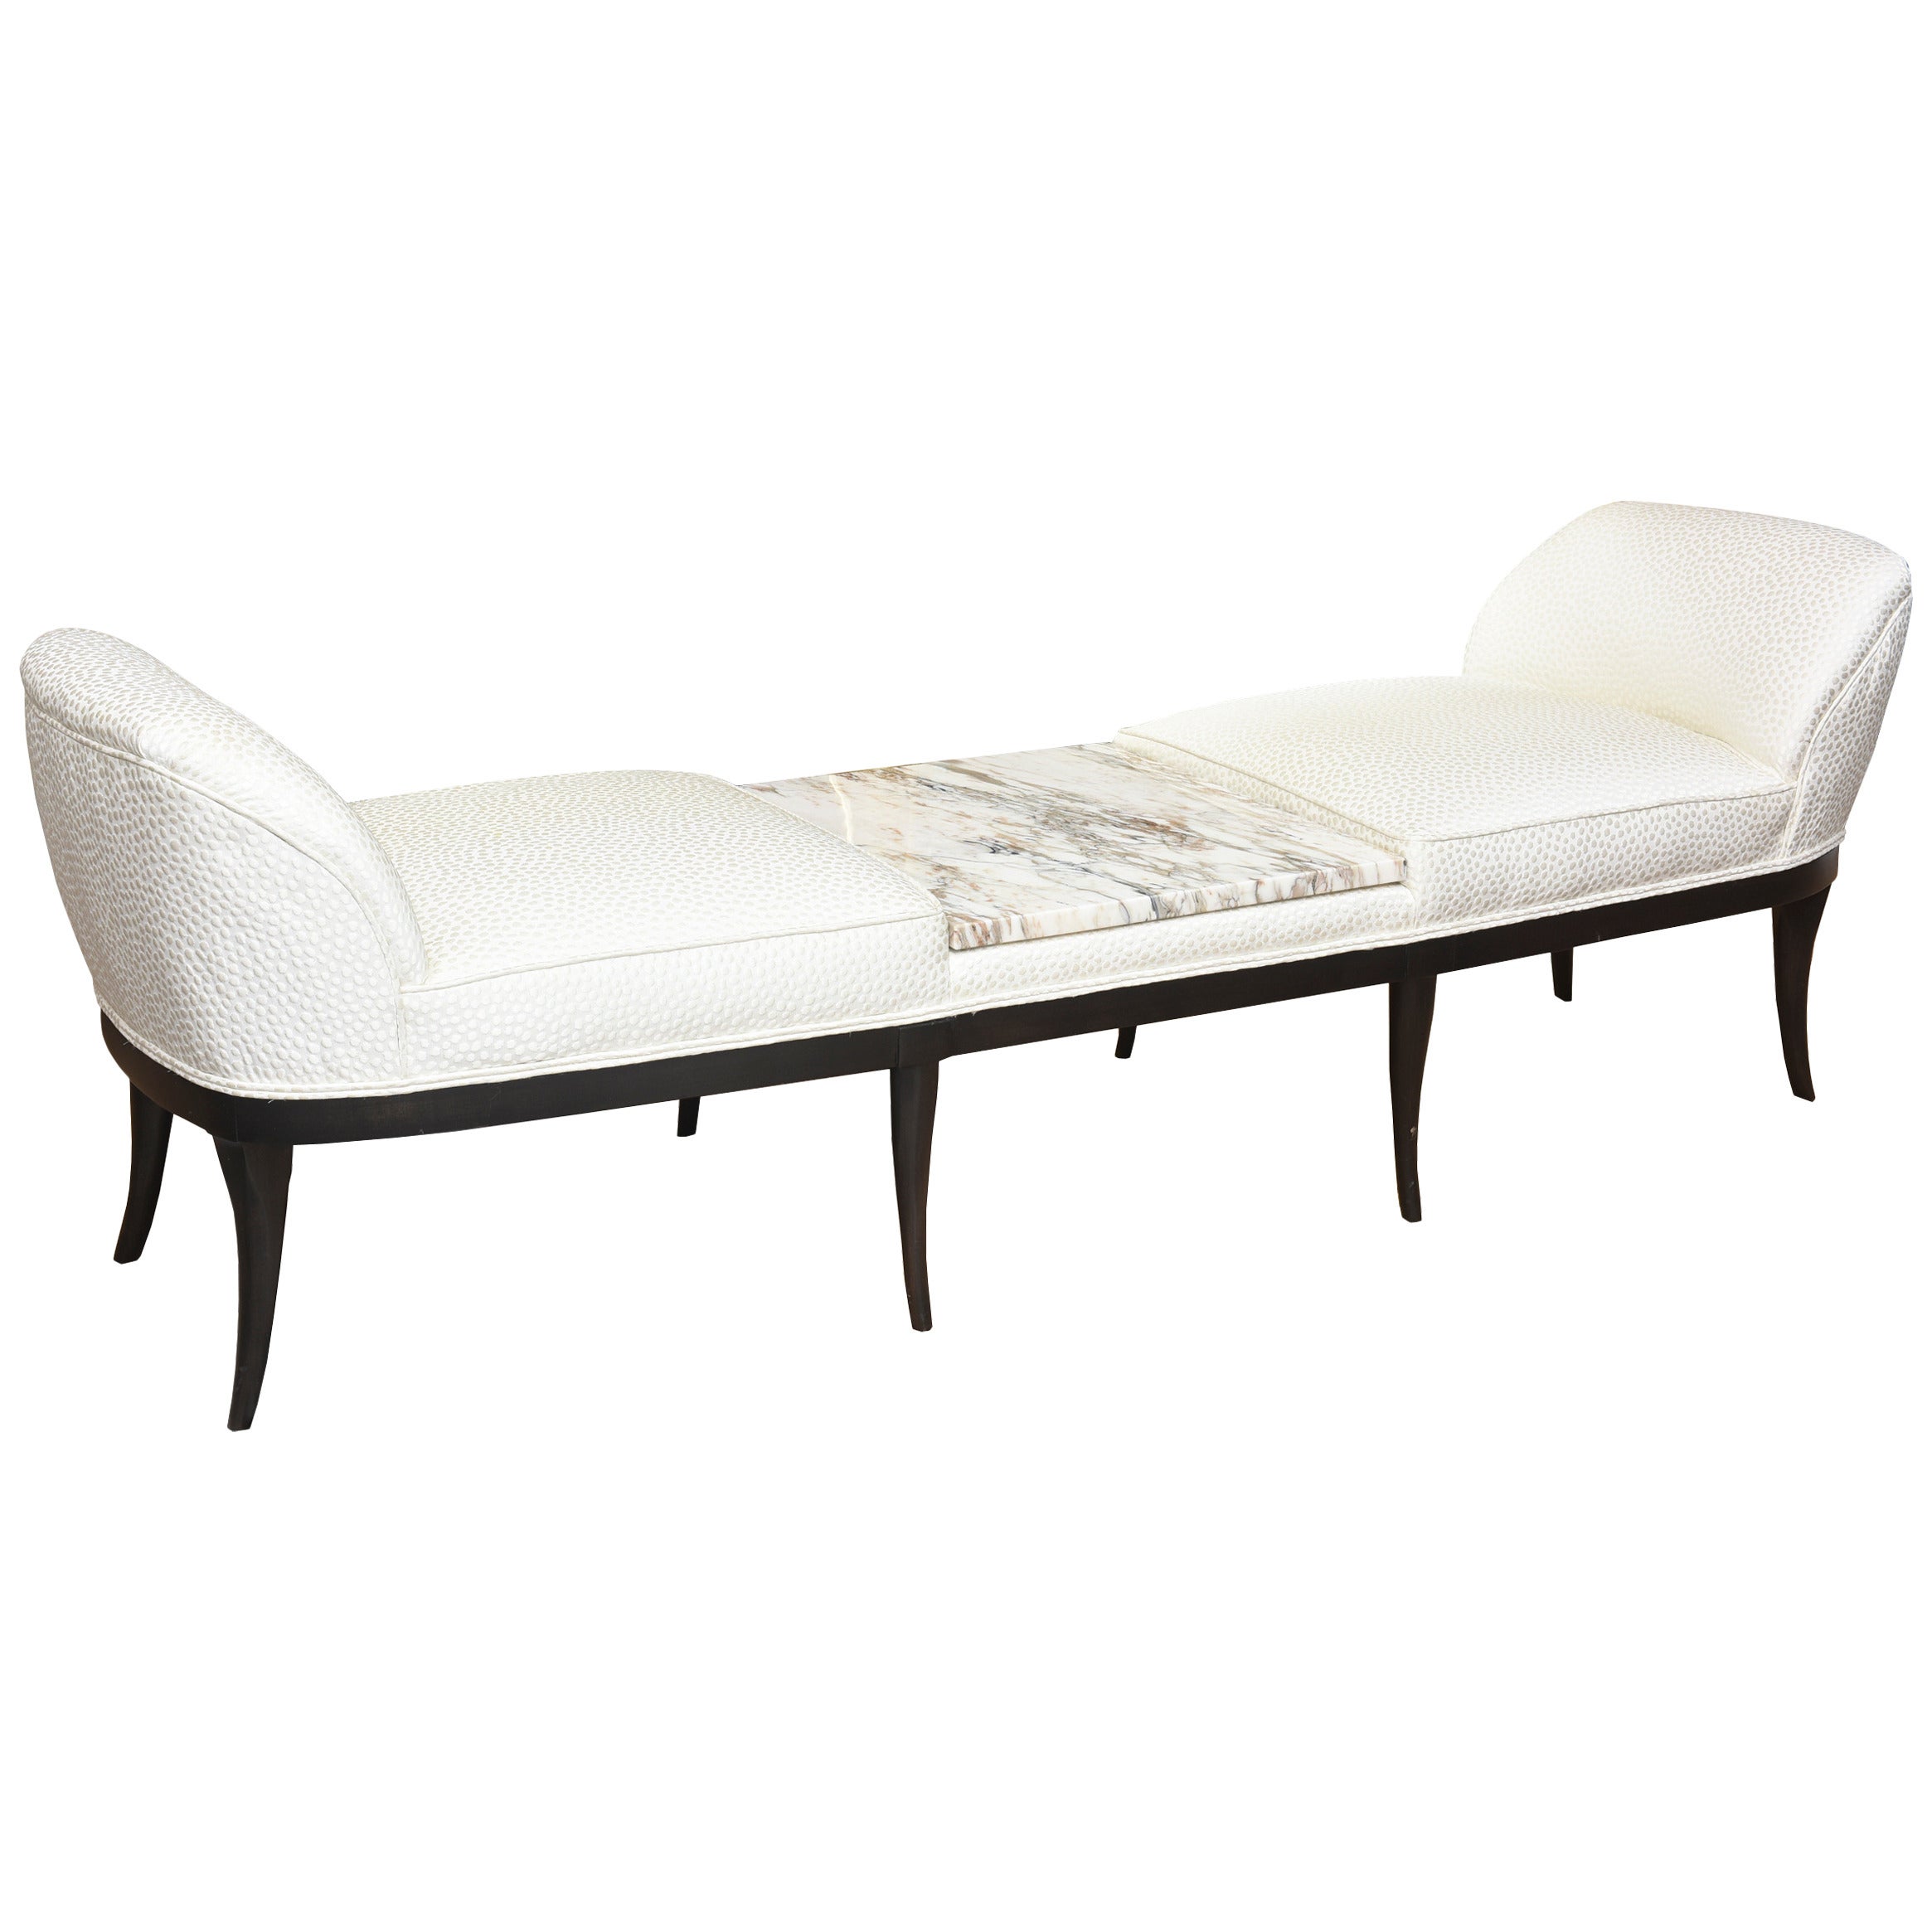 Ebonized Wood Italian Marble and Upholstered Bench, Settee, Chaise or Recamier